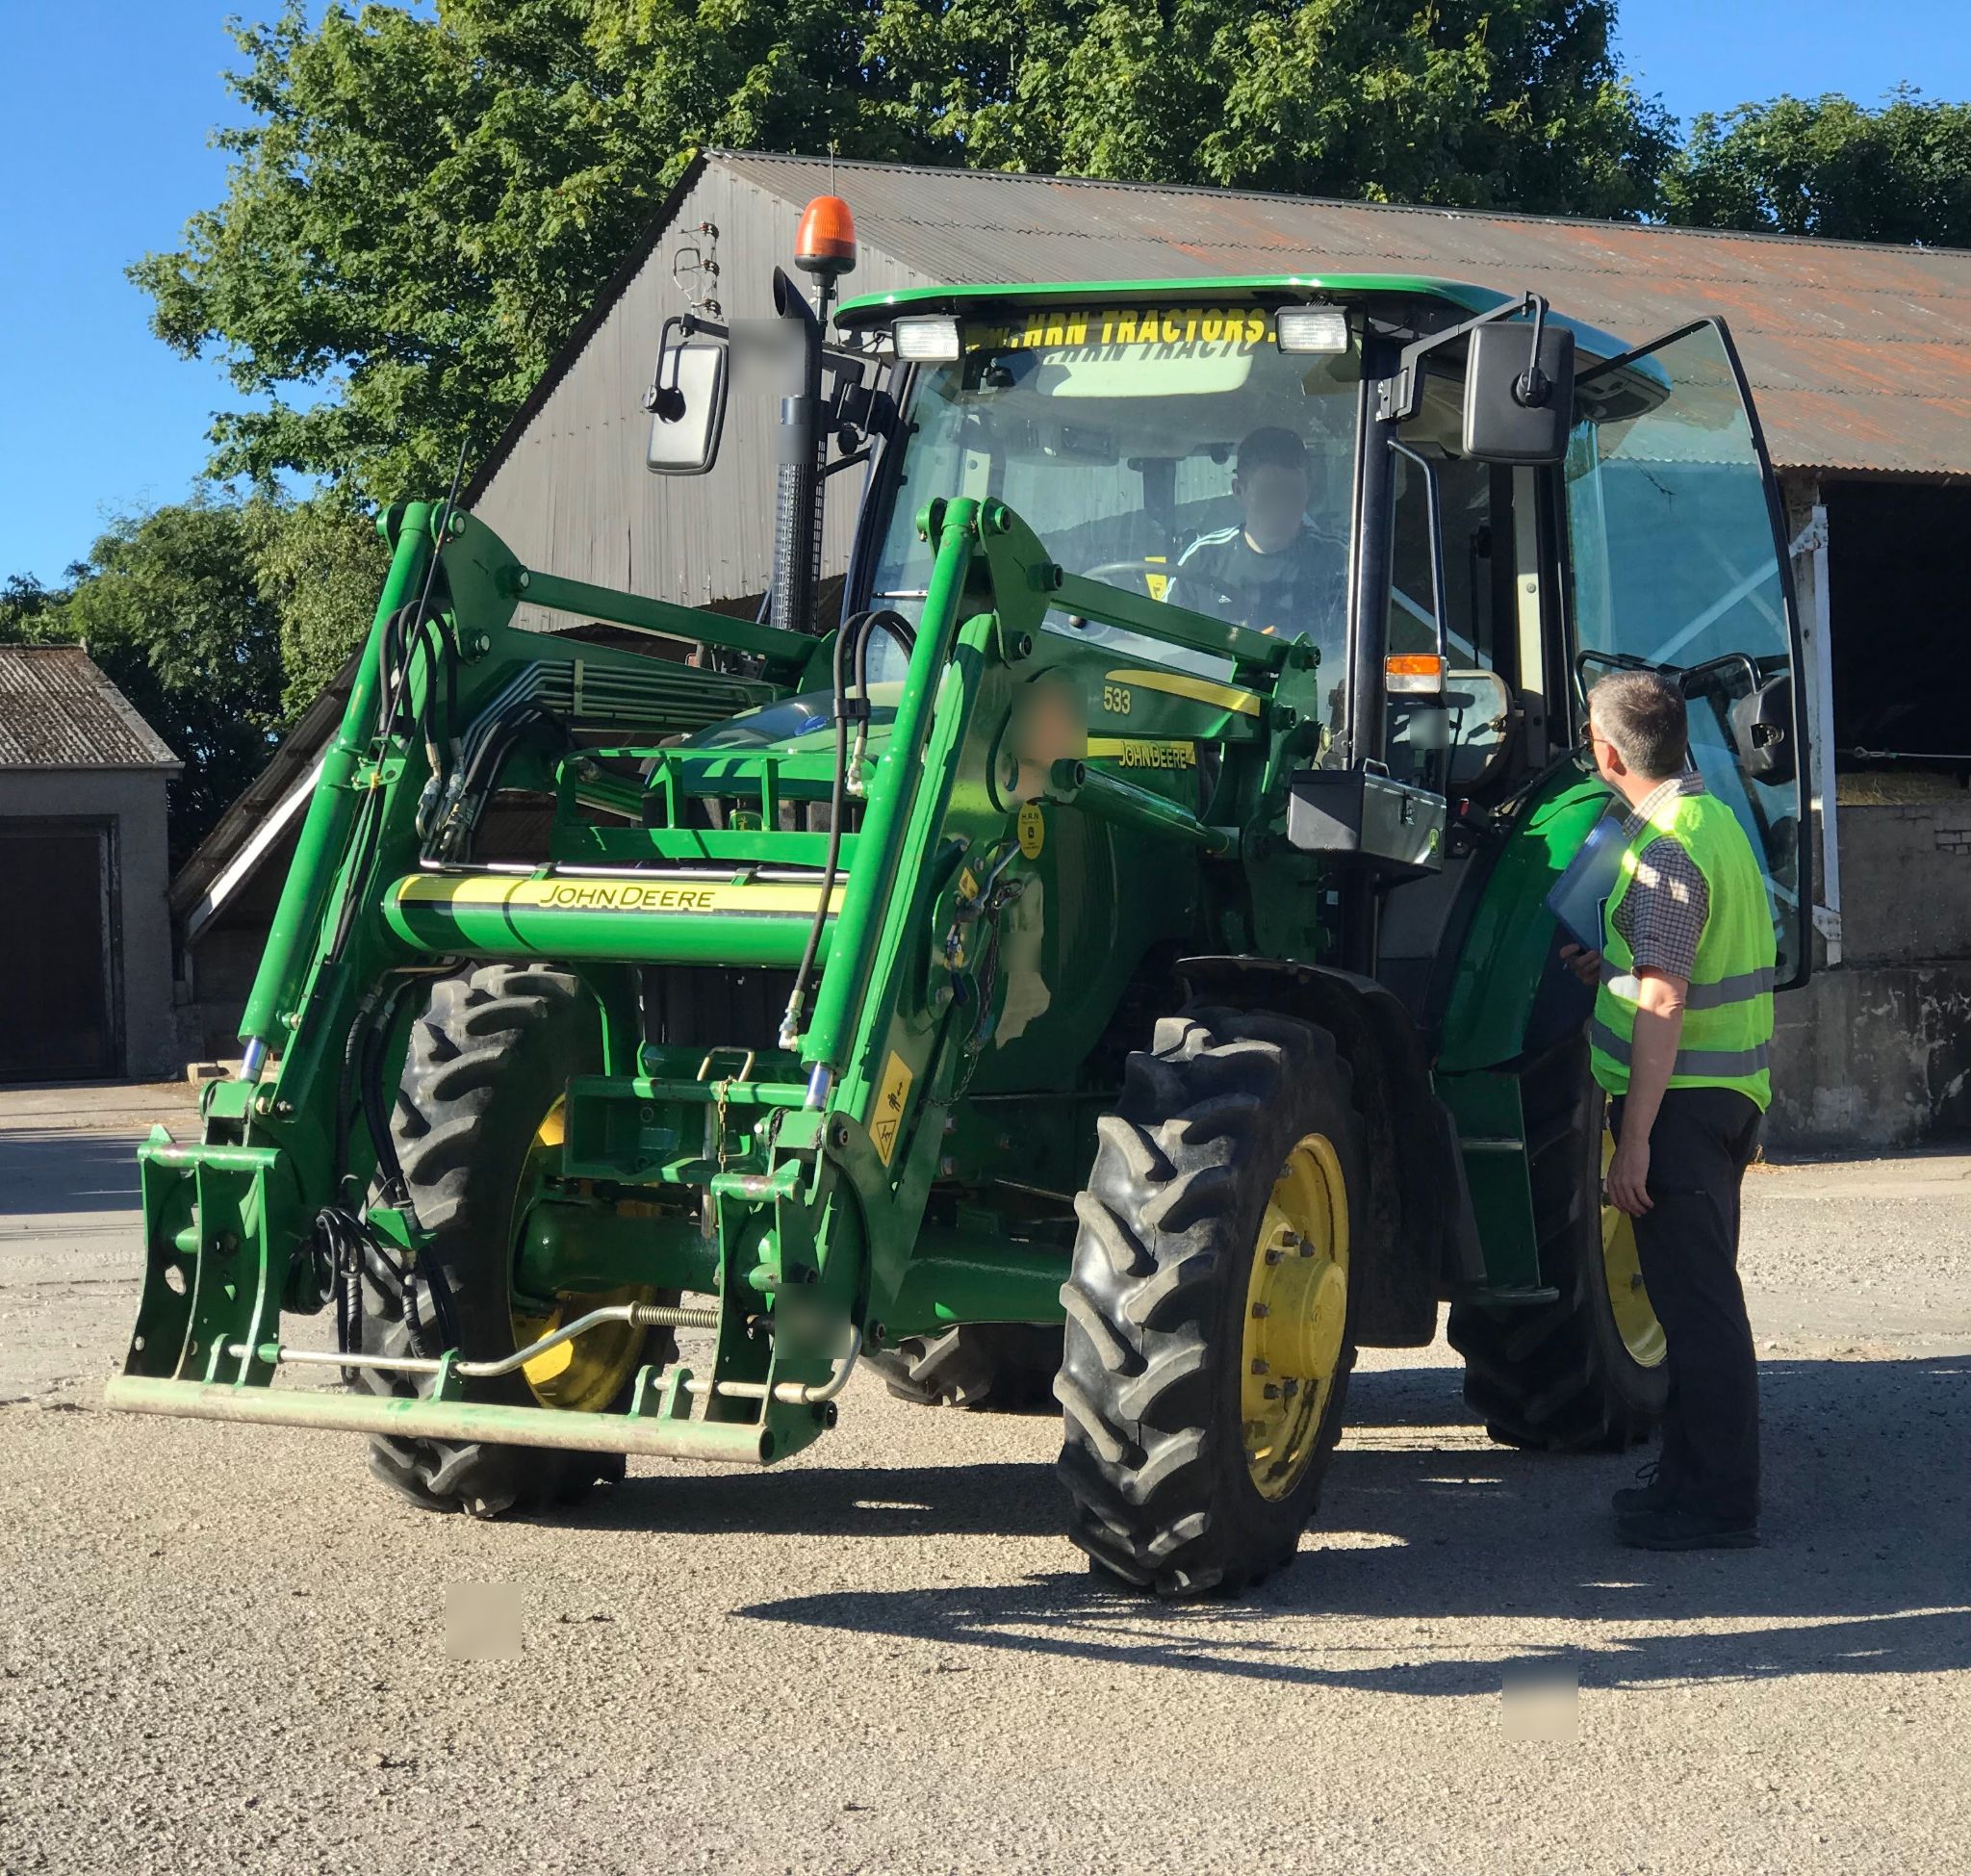 Tractor Training with Roadwise